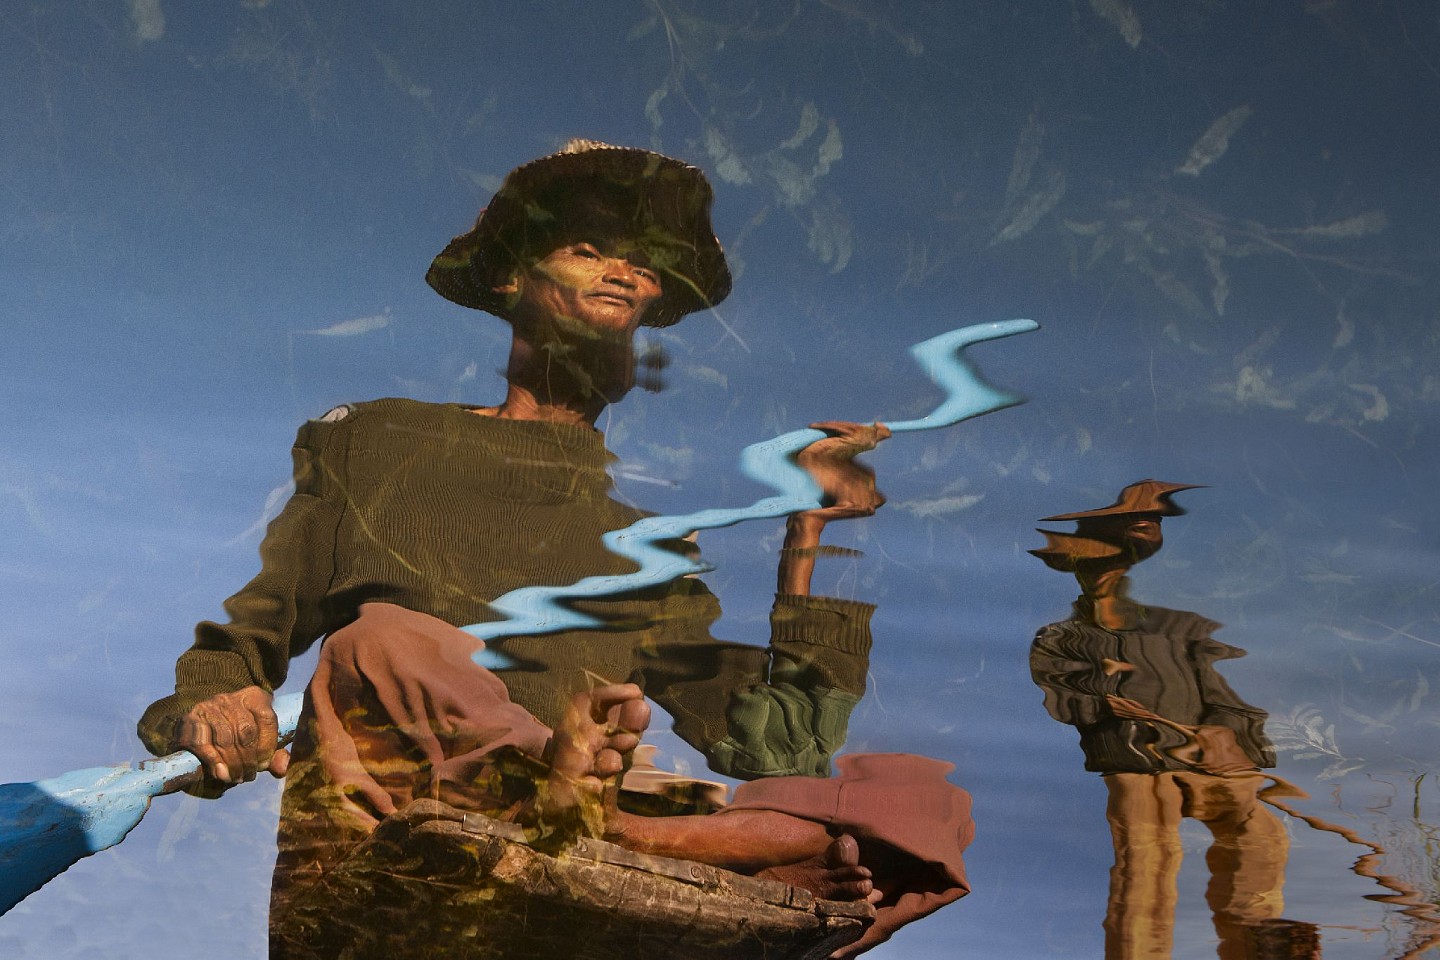 Steve McCurry, Fishermen Reflection on Lake Inle, 2011
FujiFlex Crystal Archive Print
Price/Size on request